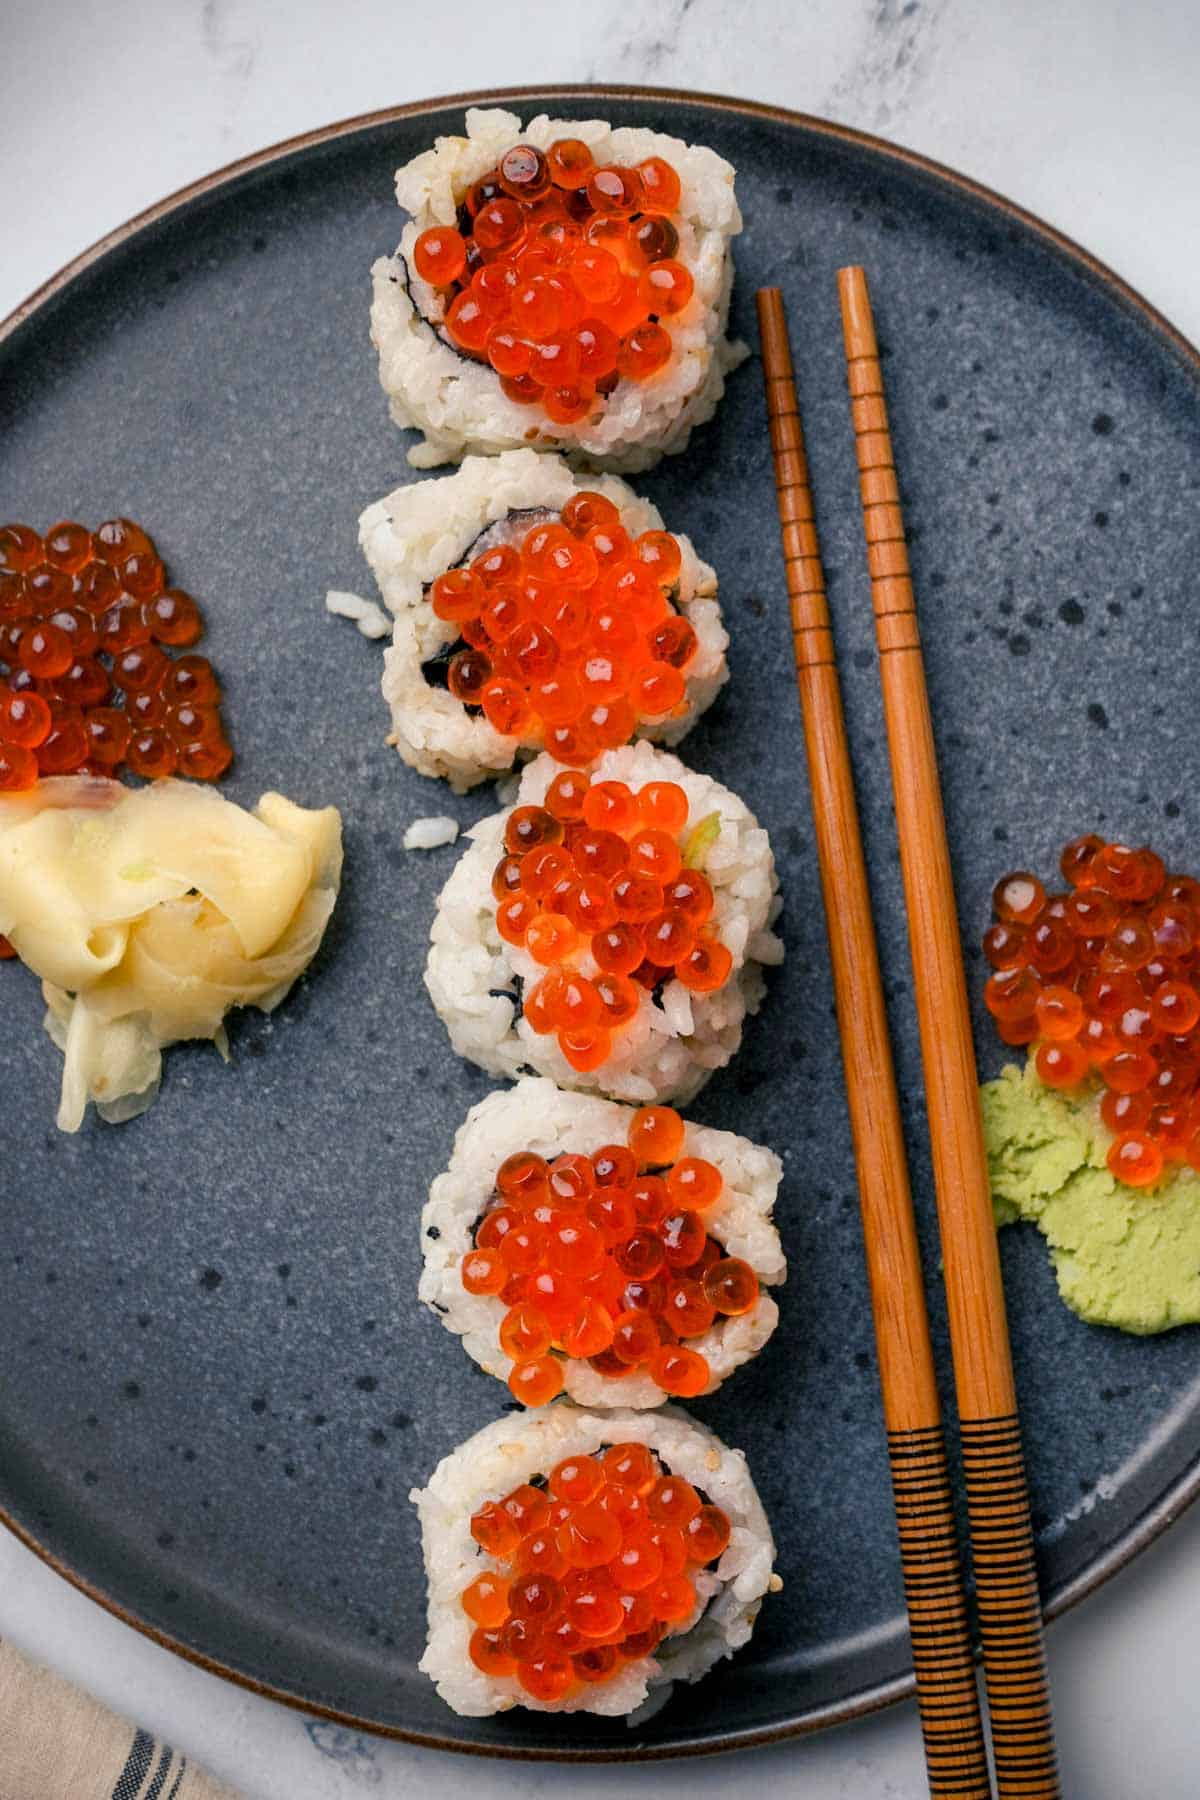 sushi rolls with orange caviar on top and ginger and wasabi on the side